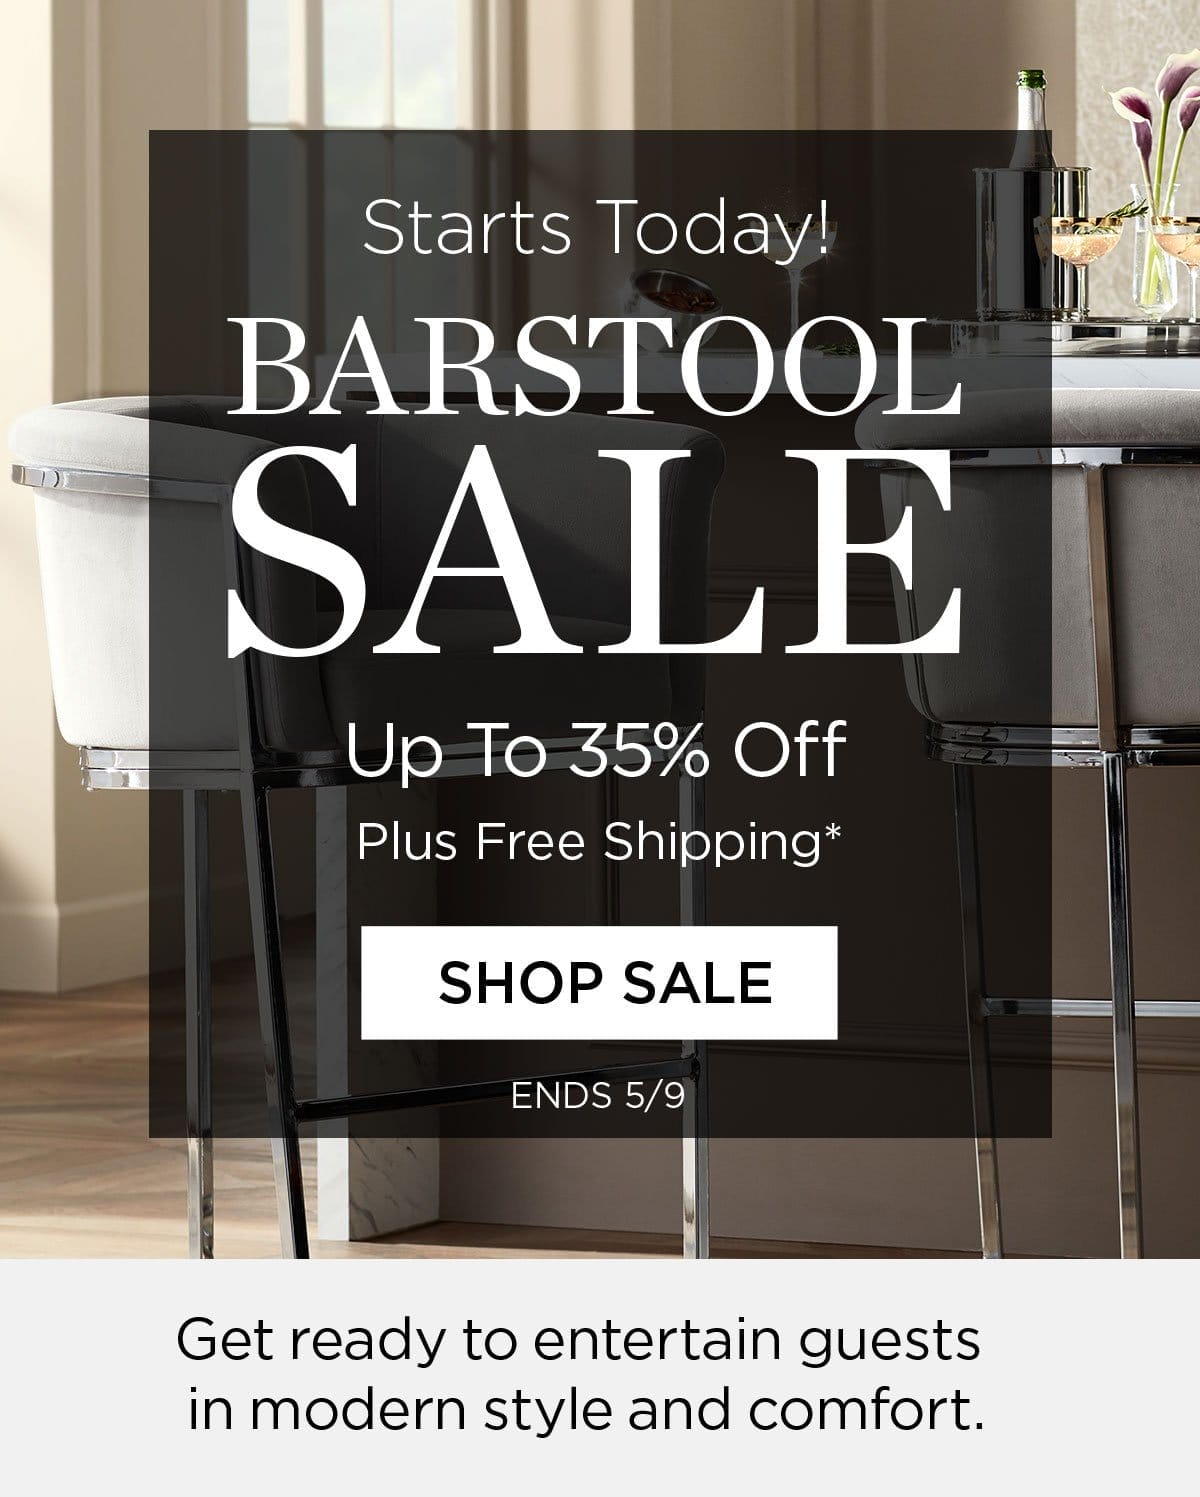 Starts Today! - Barstool Sale - Up to 35% Off - Plus Free Shipping* - Shop Sale - Ends 5/9 - Get ready to entertain guests in modern style and comfort.